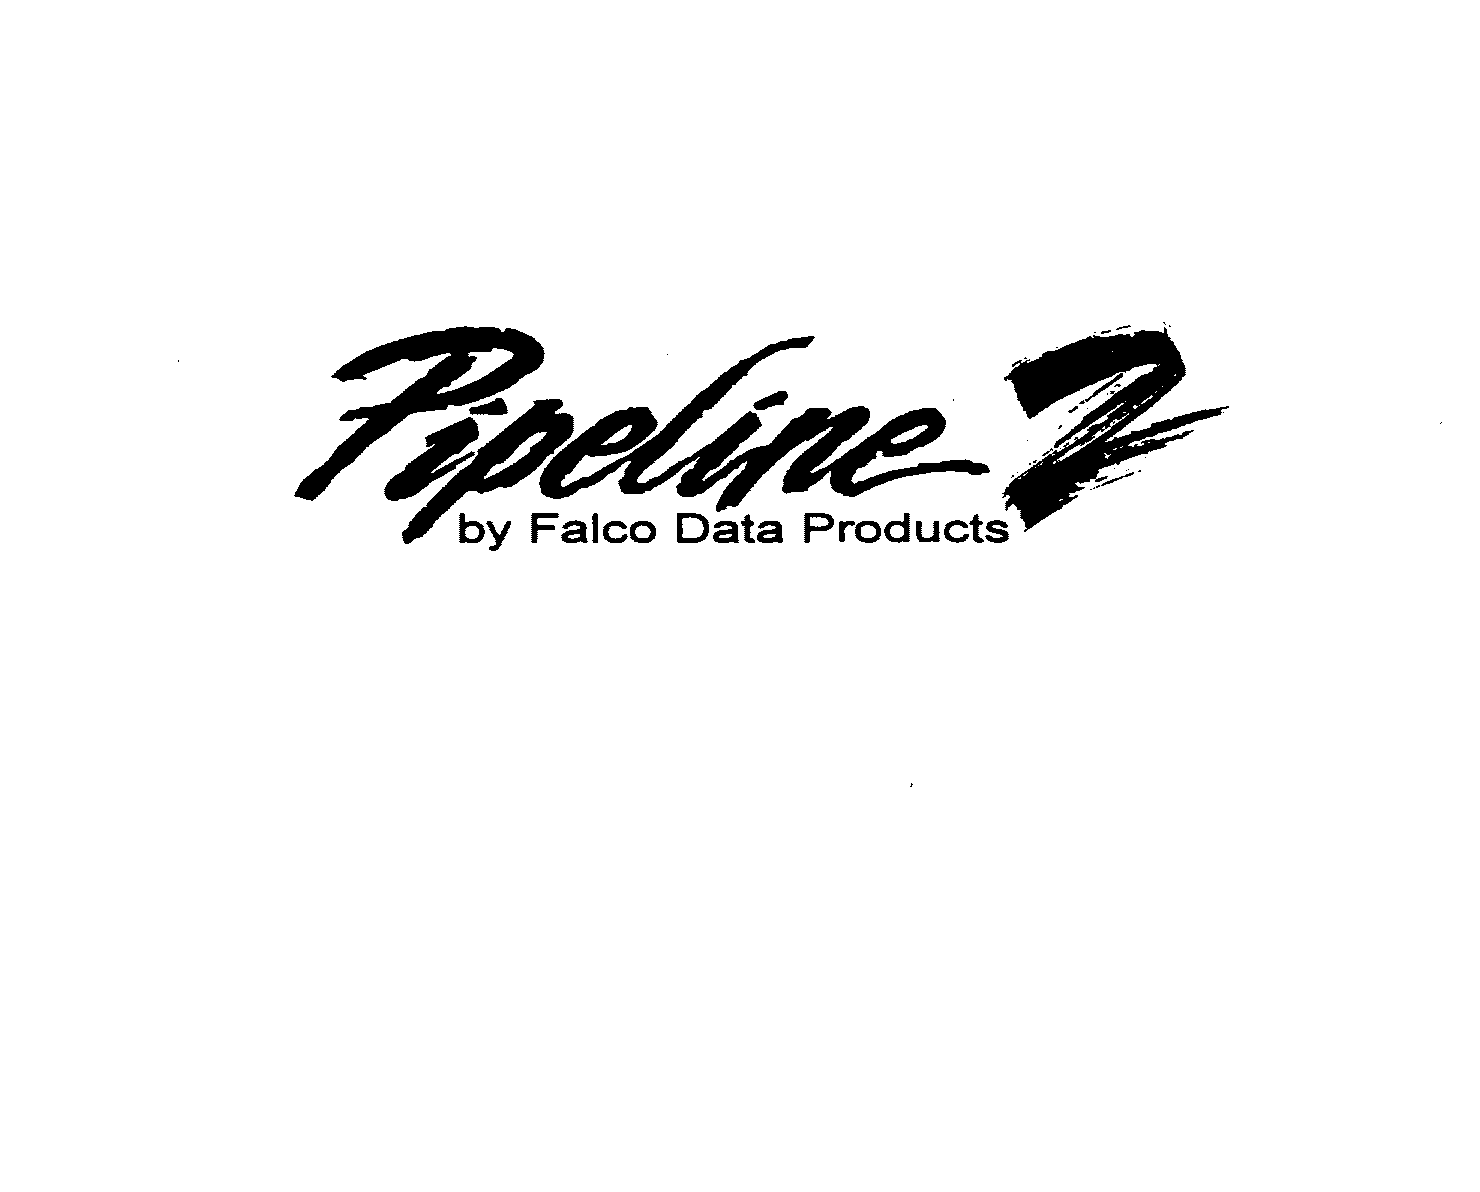  PIPELINE 2 BY FALCO DATA PRODUCTS